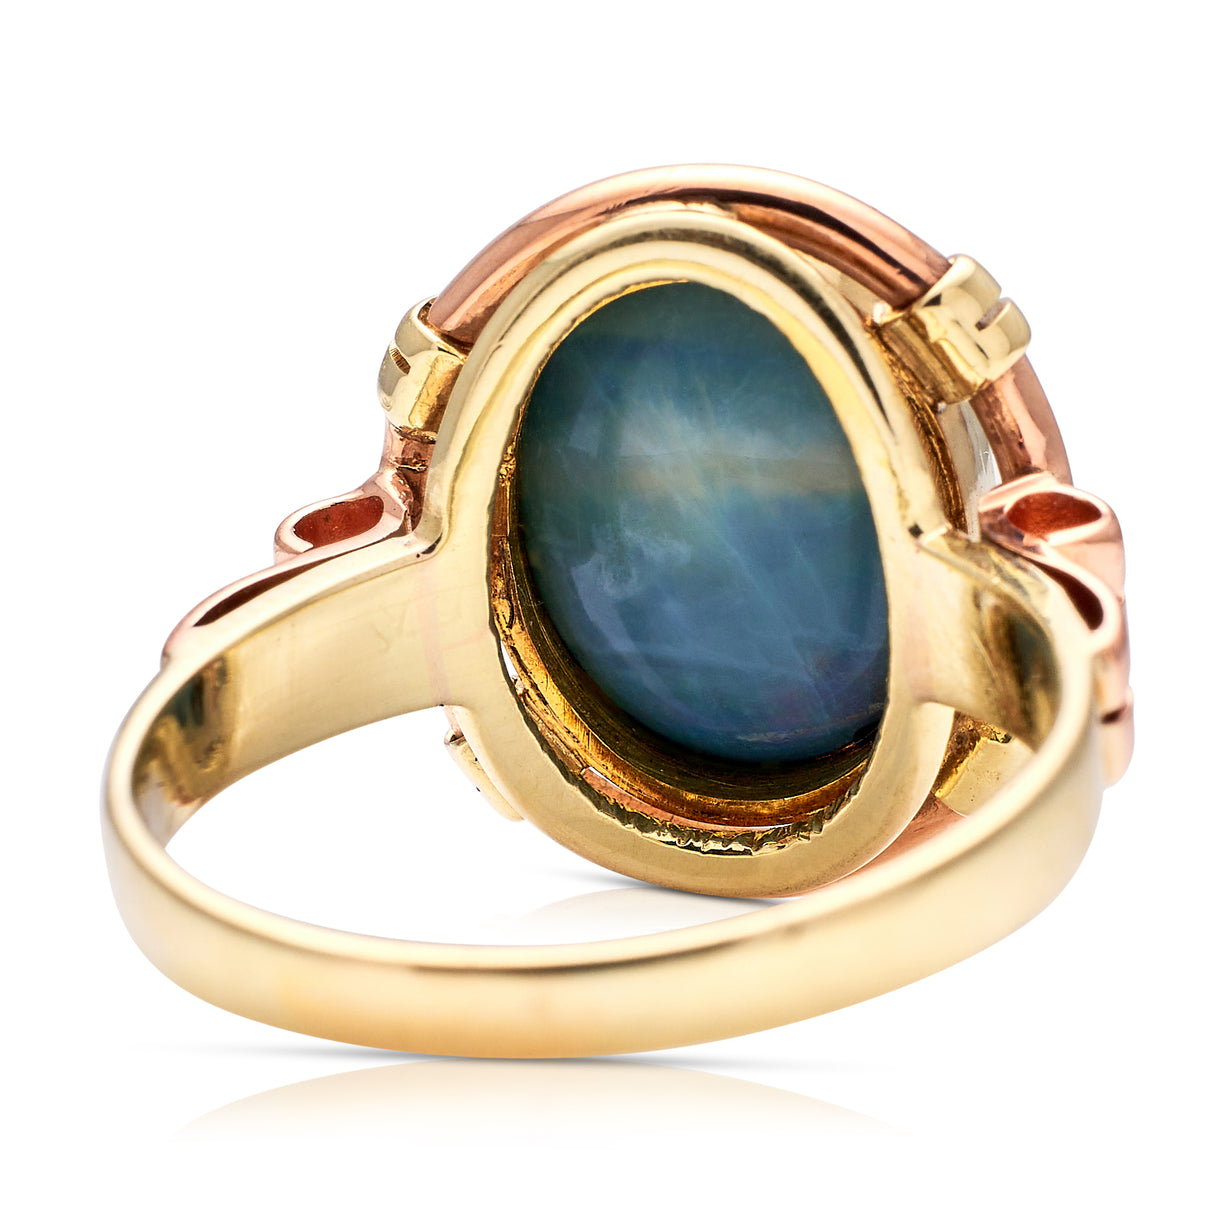 Antique | 1920s, Black Opal Ring, Rose & Yellow Gold